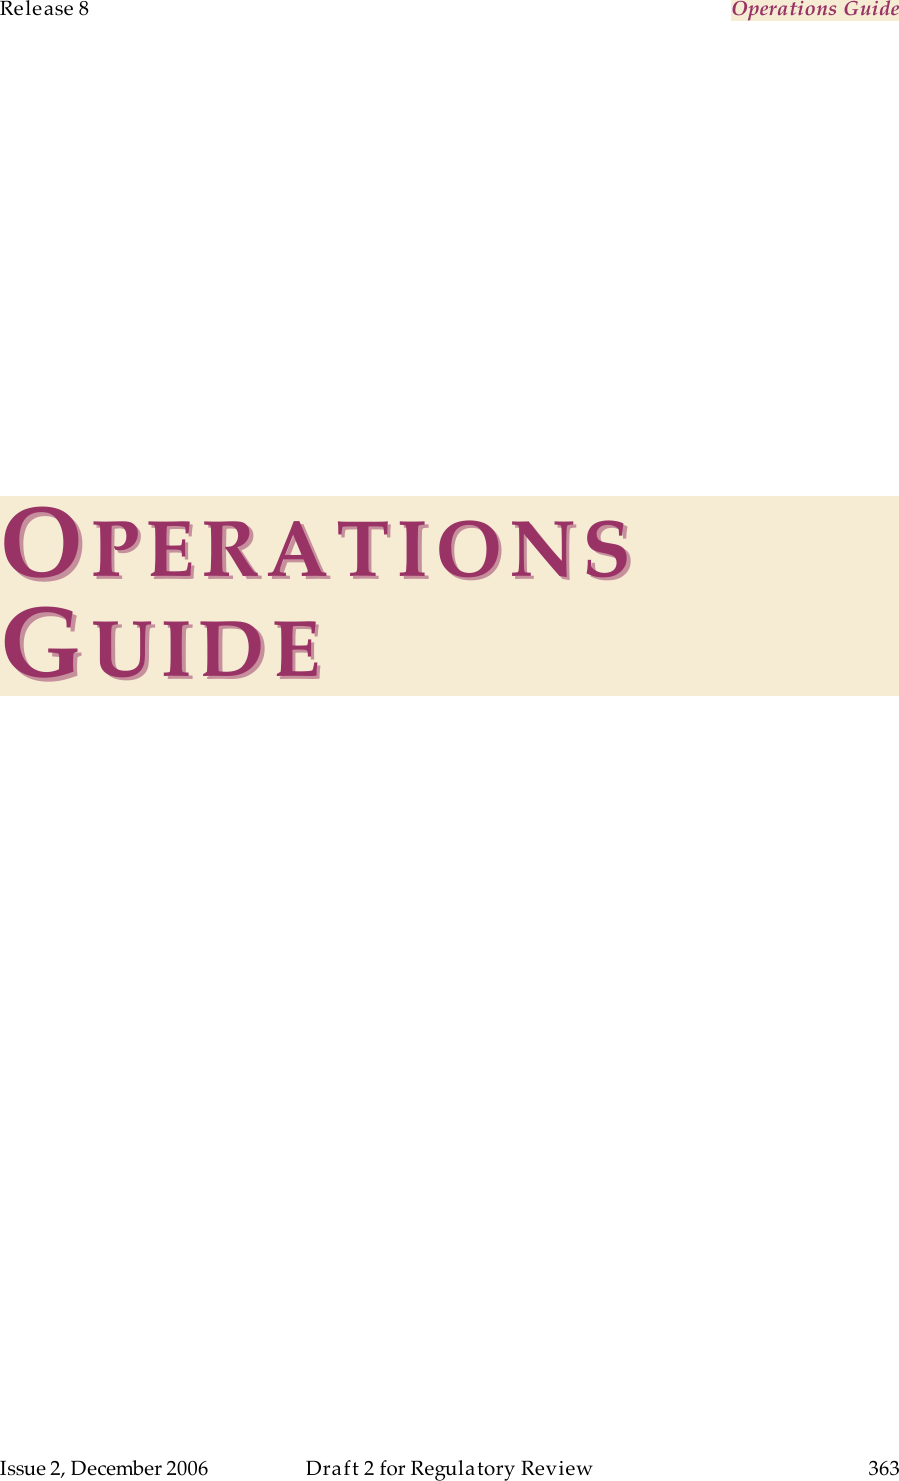 Release 8    Operations Guide   Issue 2, December 2006  Draft 2 for Regulatory Review  363     OOPERATIONS PERATIONS GGUIDEUIDE   